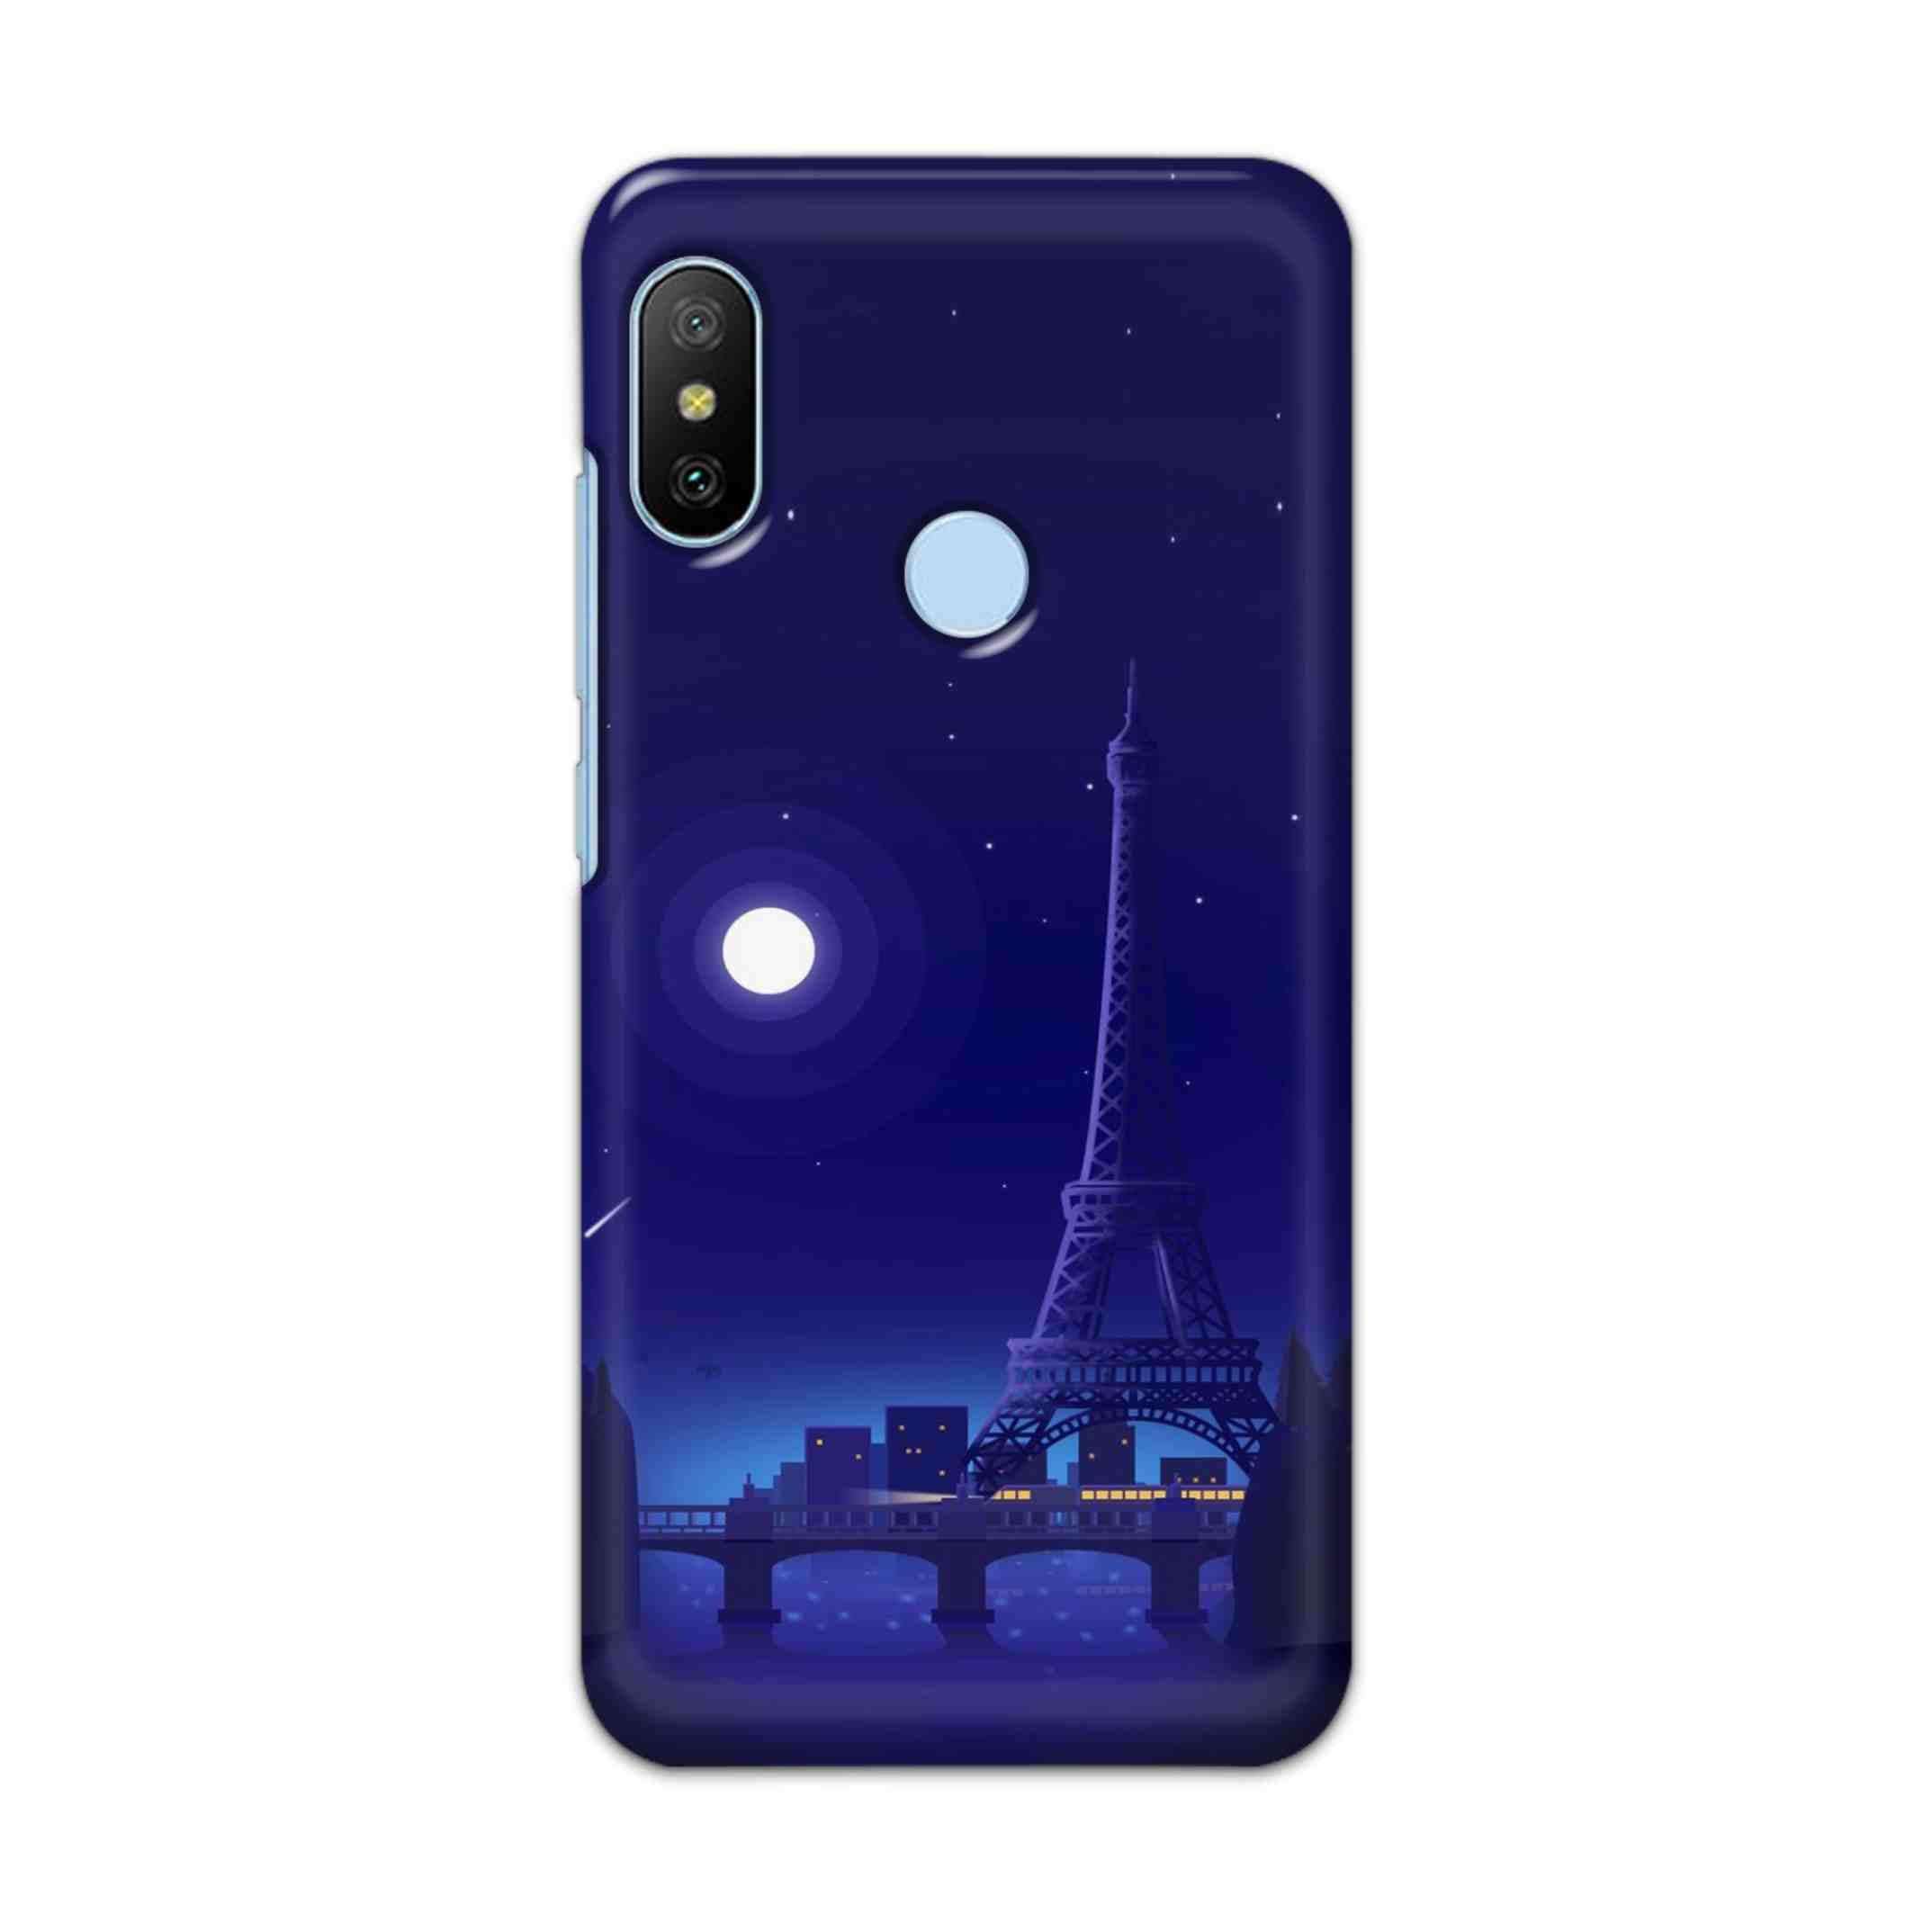 Buy Night Eifferl Tower Hard Back Mobile Phone Case/Cover For Xiaomi Redmi 6 Pro Online